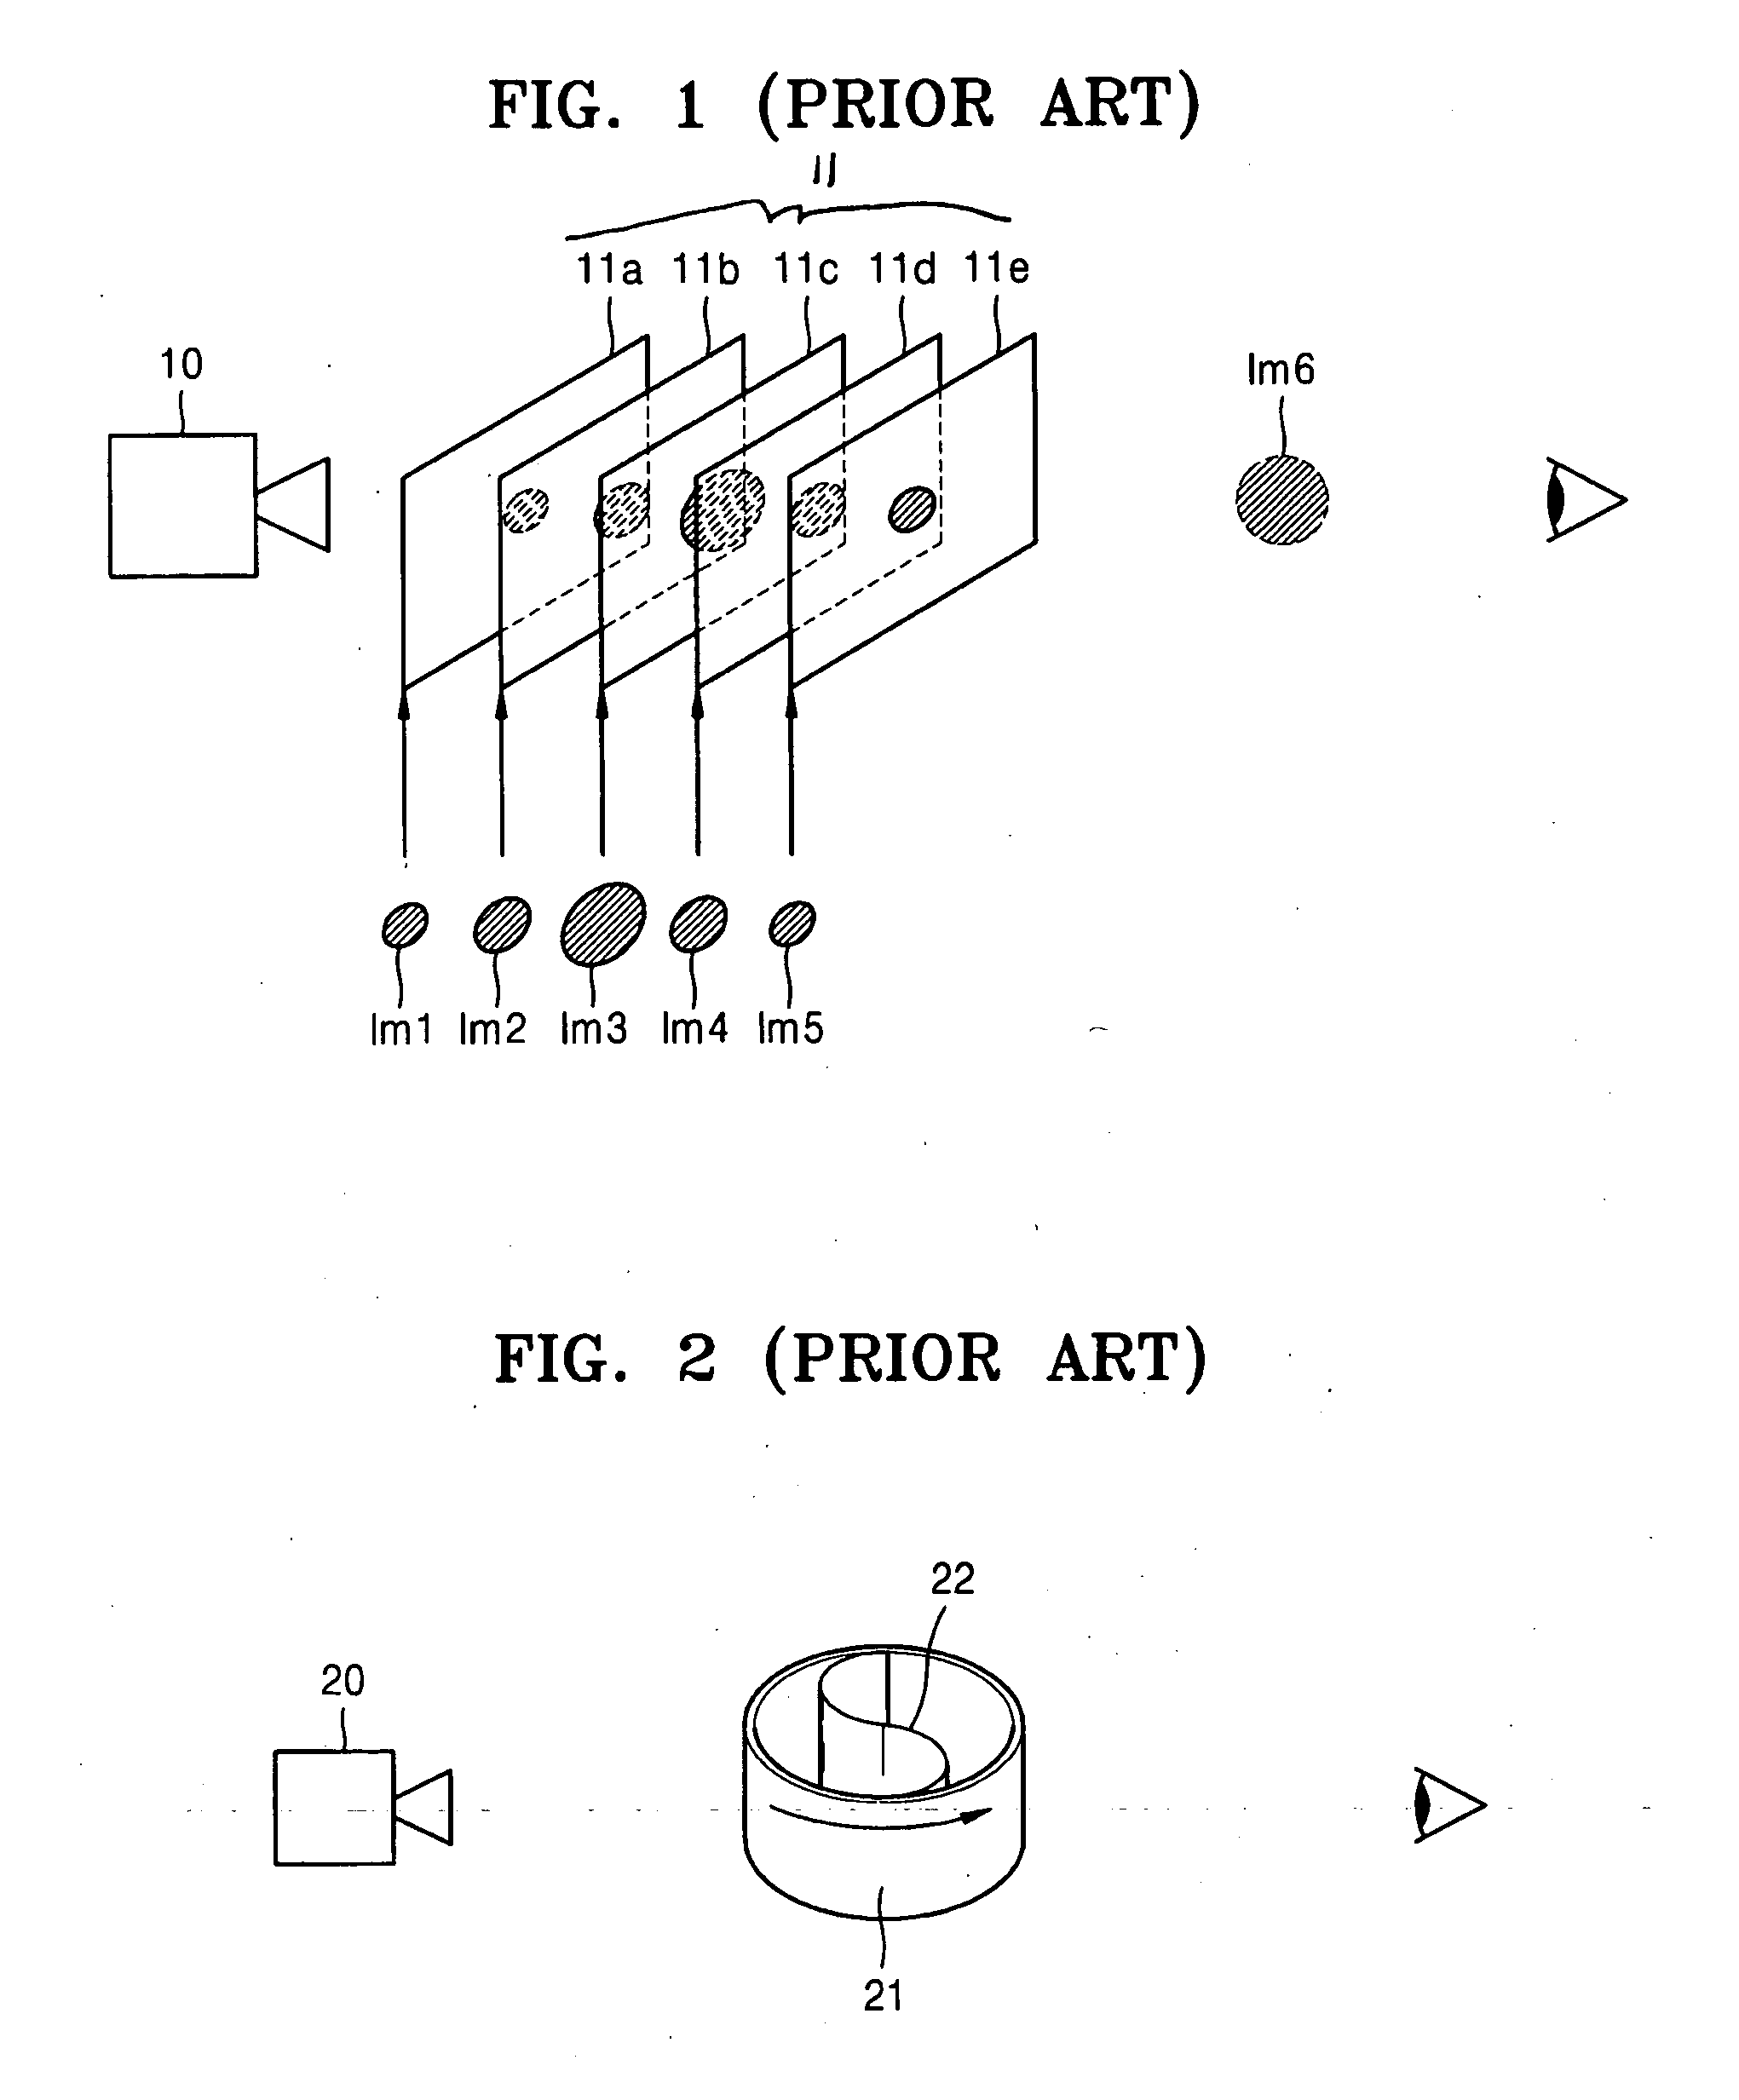 Volumetric three-dimentional display panel and system using multi-layered organic light emitting devices